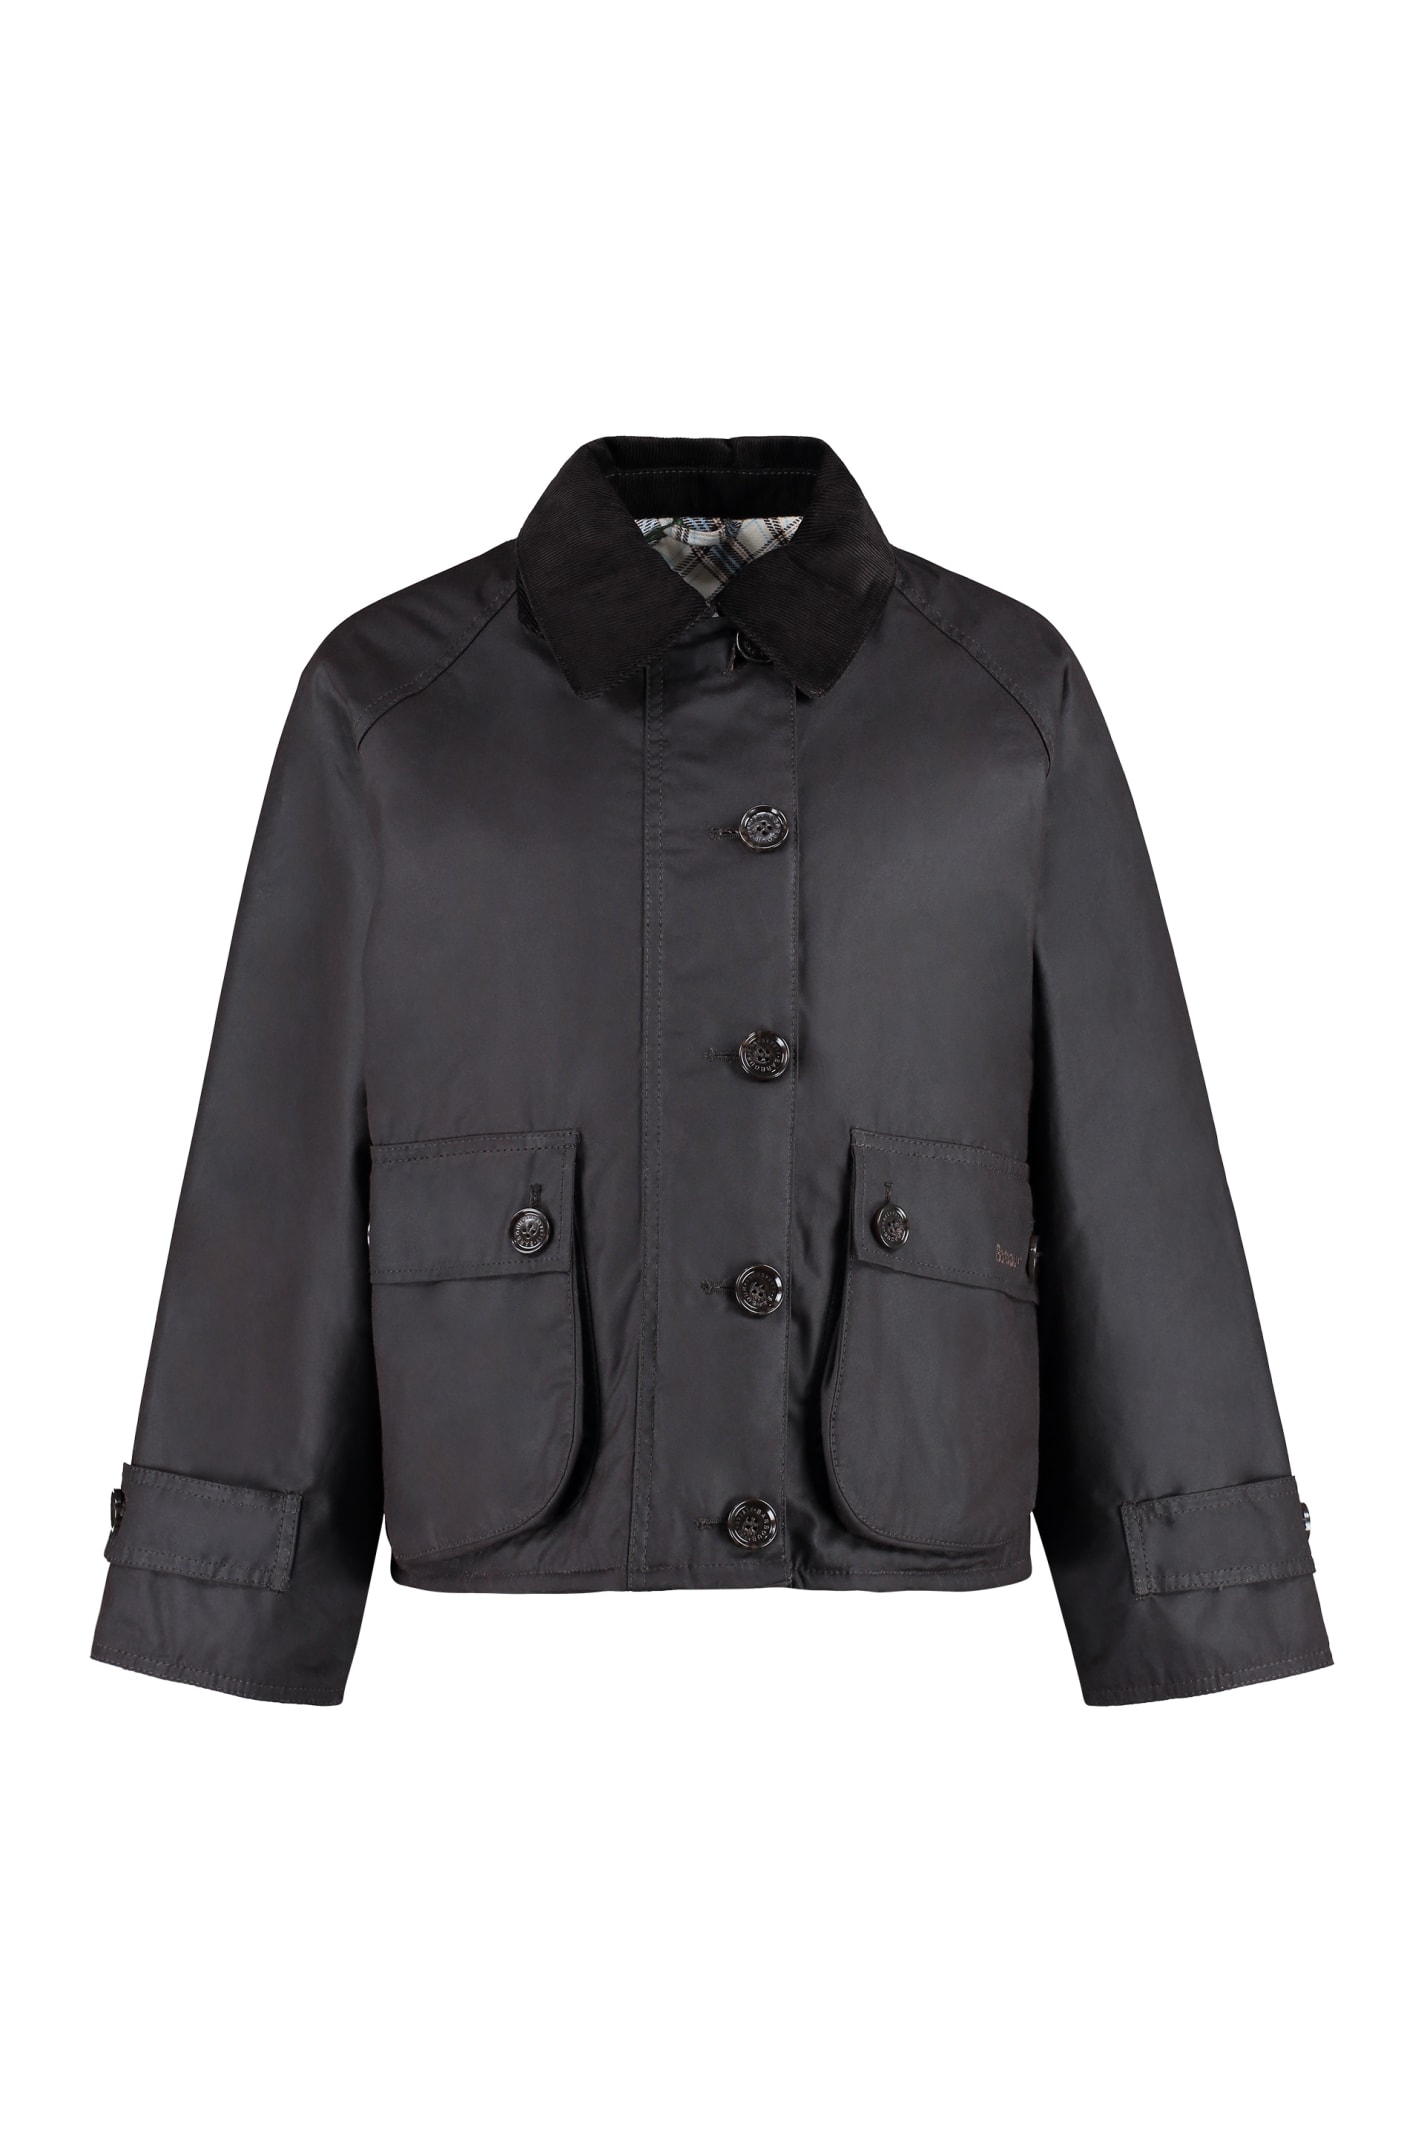 Barbour Blair Waxed Cotton Jacket